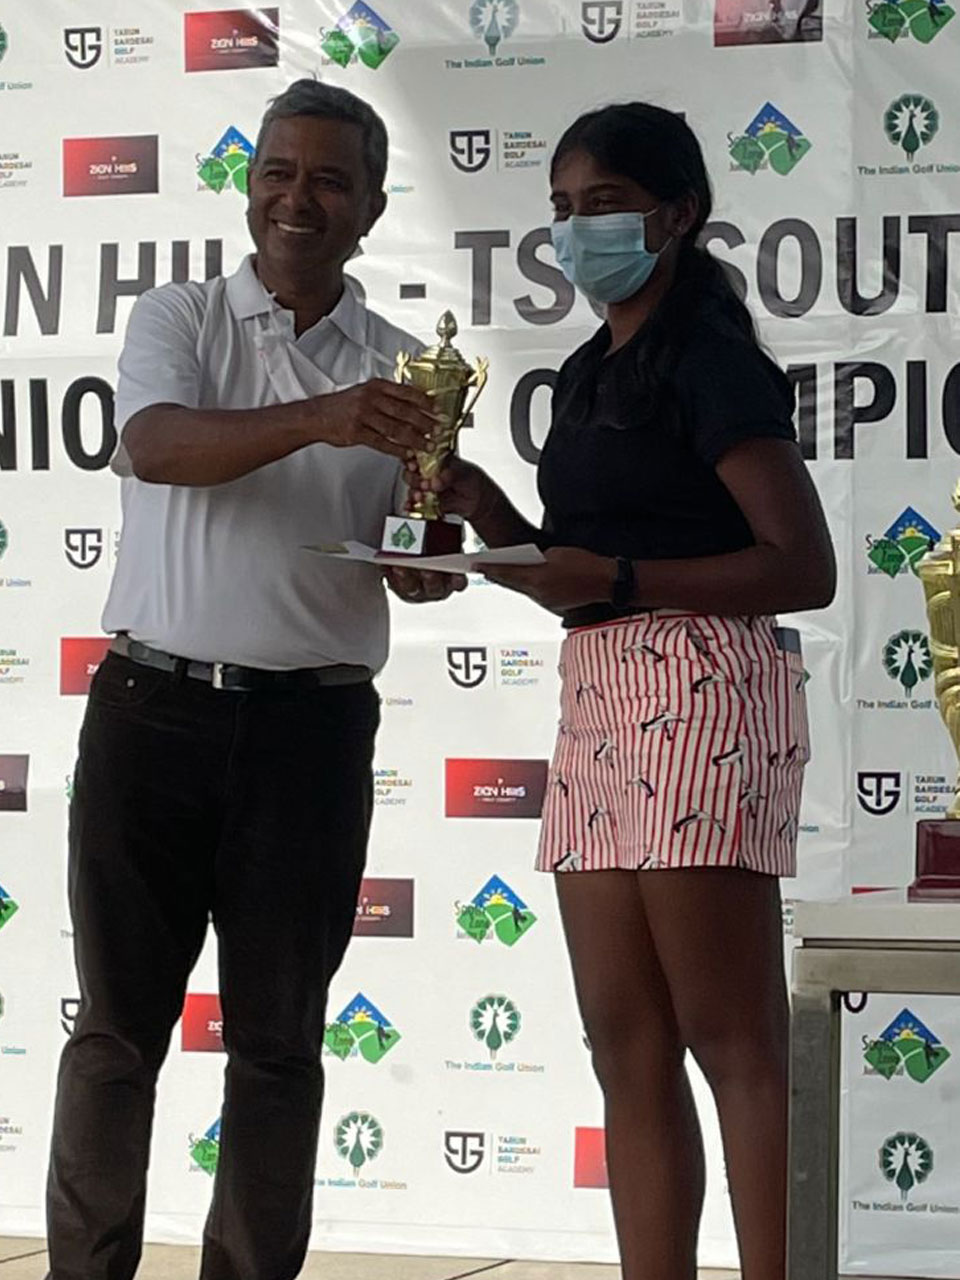 Keerthana Rajeev wins in Category B Girls at the Zion Hills